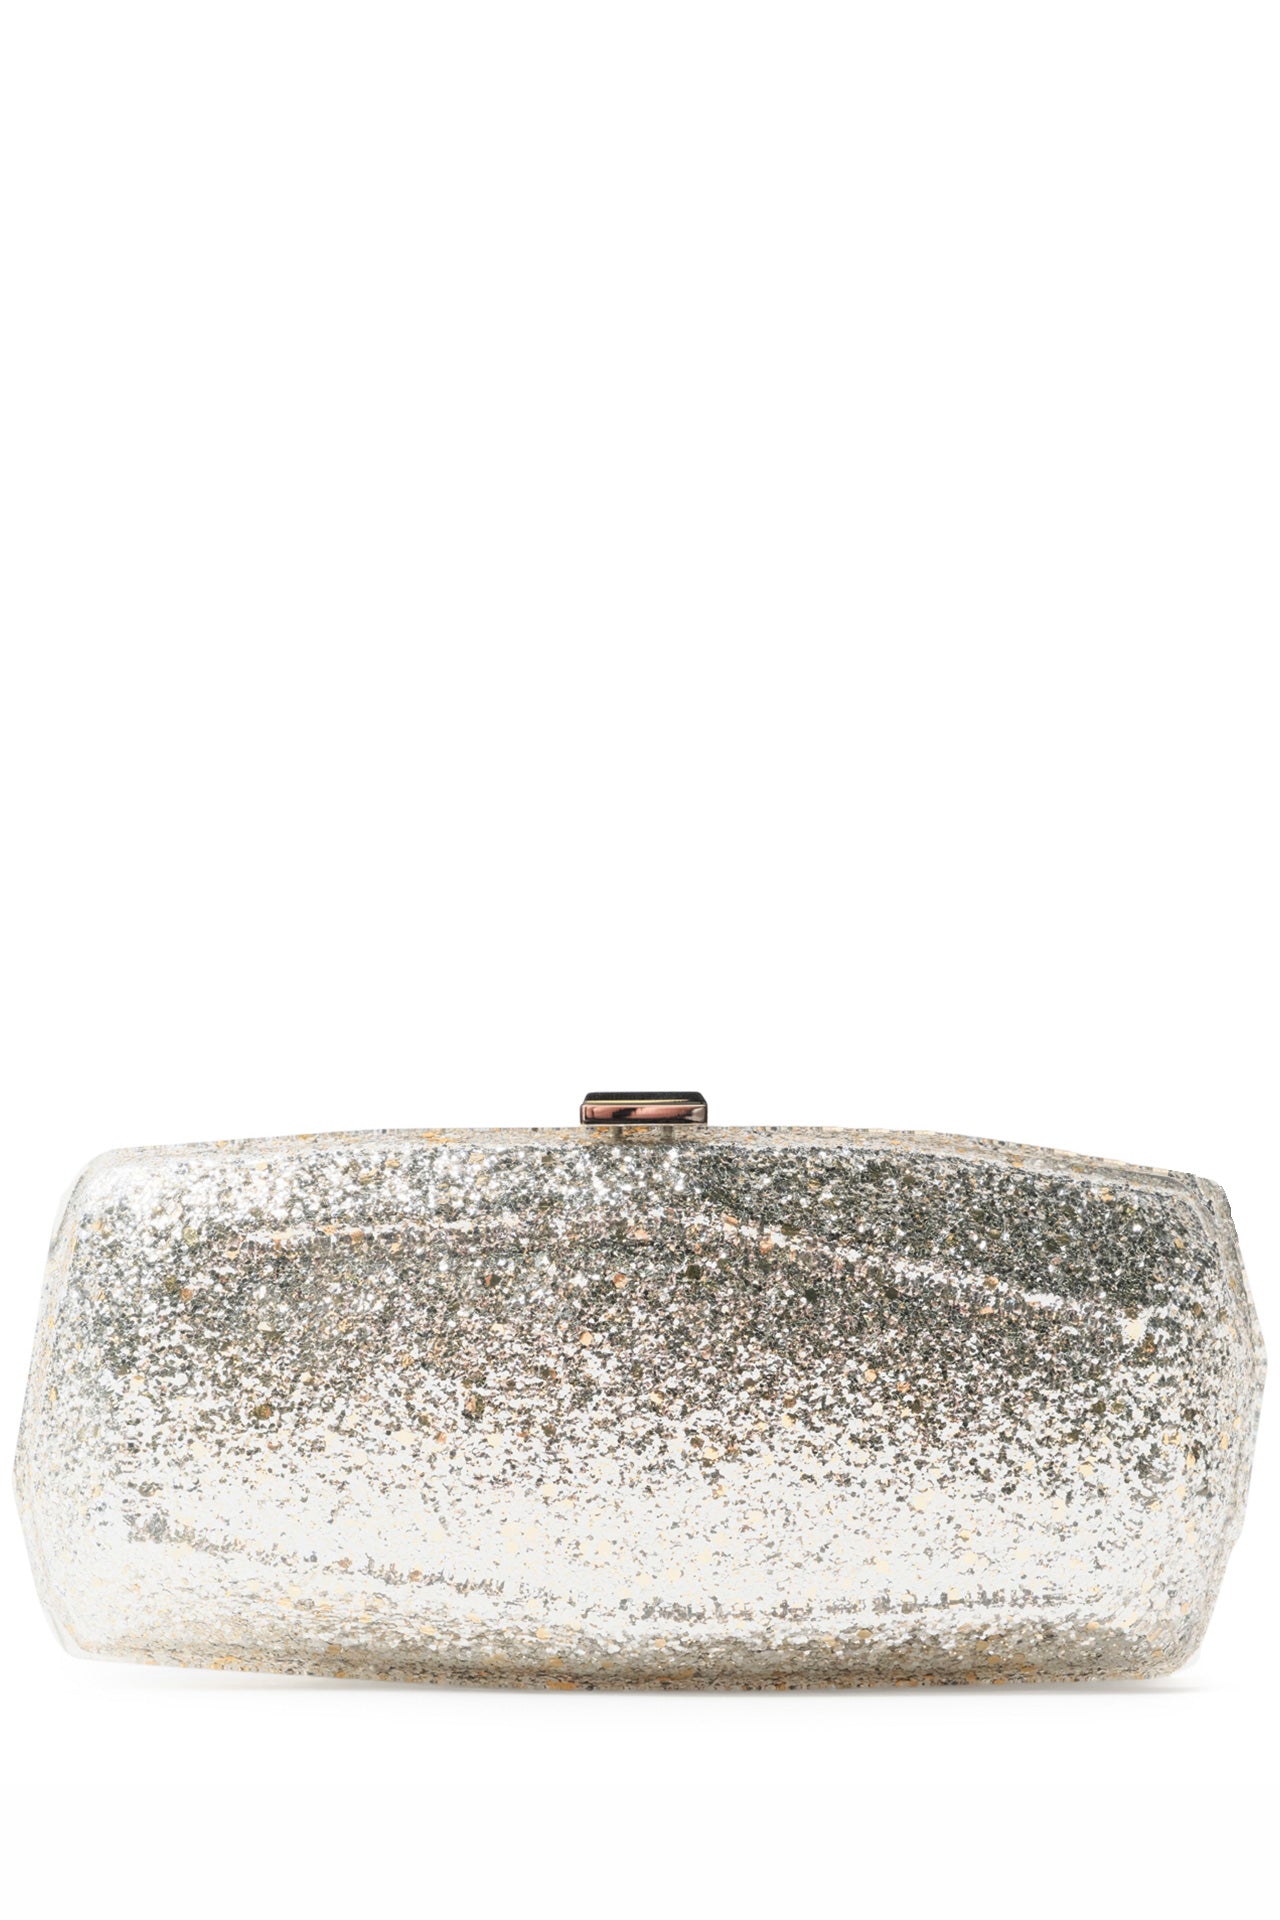 Monique Lhuillier lucite faceted minaudière handbag in Silver Glitter with detachable chain - front without chain.